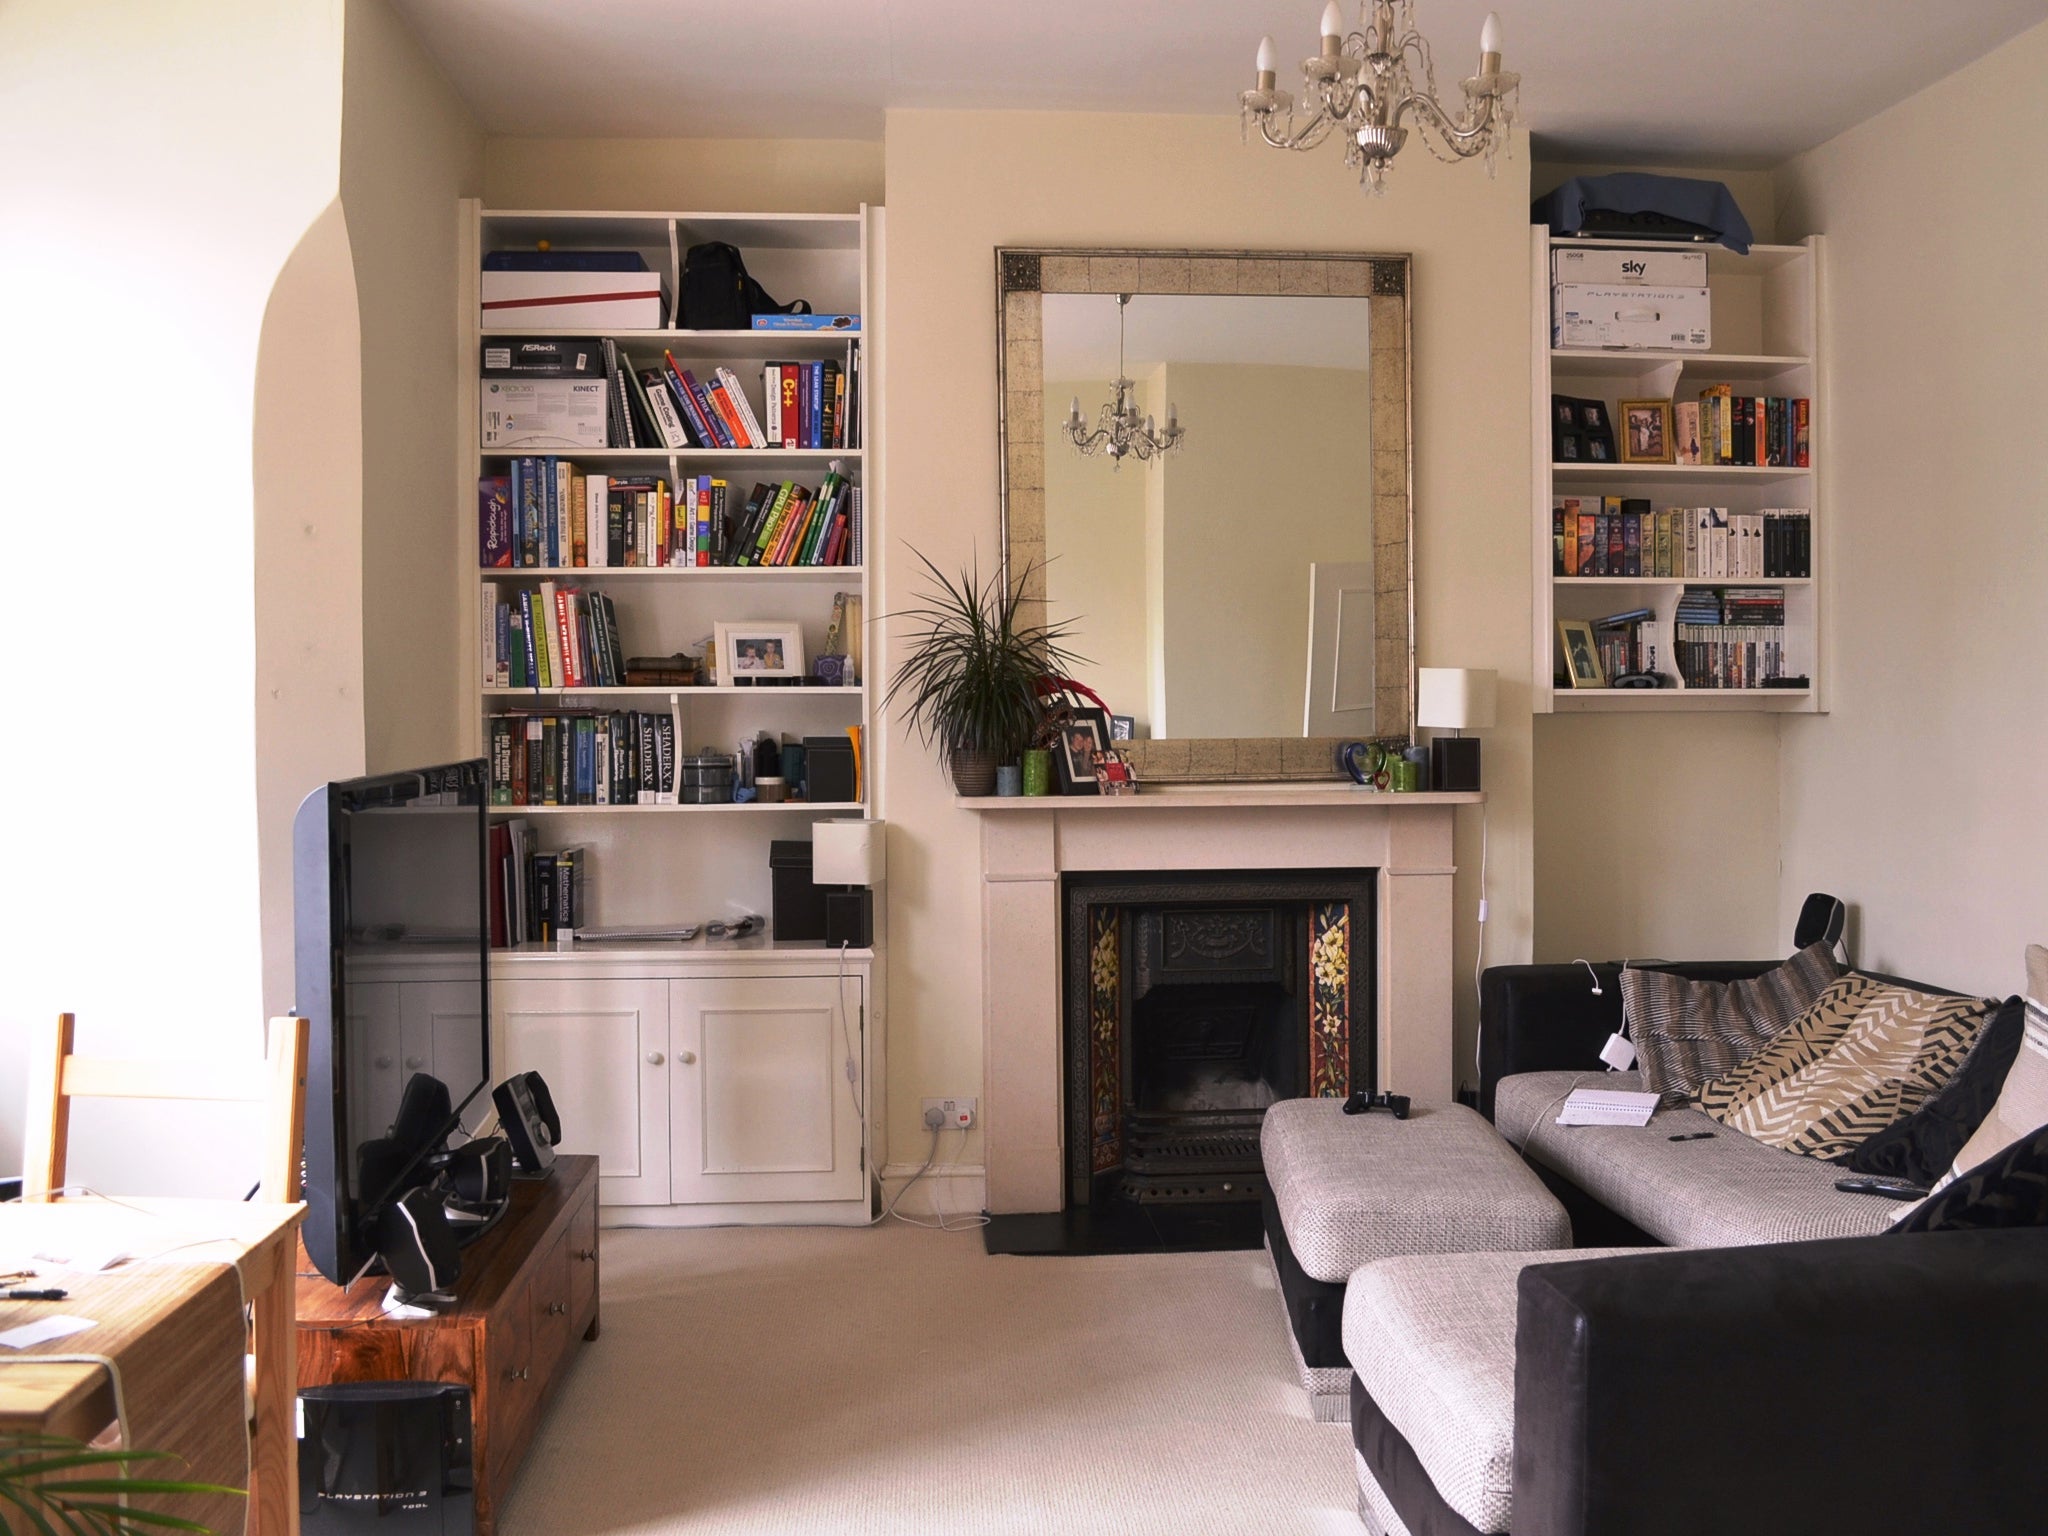 2 bedroom flat to rent in Cross Street, Oxford, for £254 pw with Penny & Sinclair